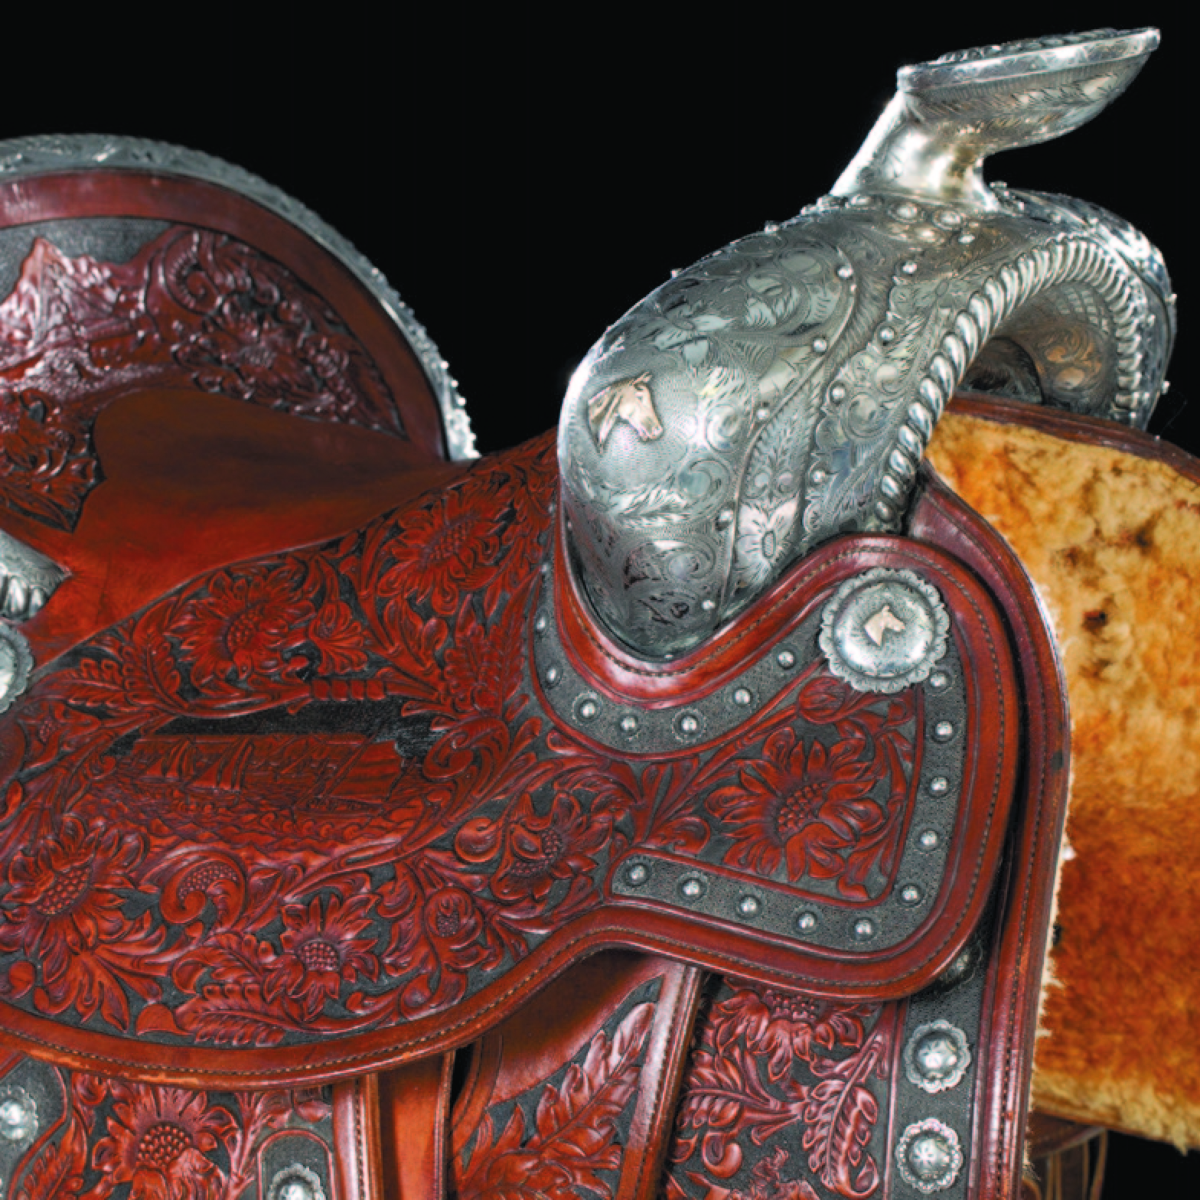 This Keyston Bros, San Francisco, exhibition, sterling silver-mounted saddle with intricate carving fetched $121,000.